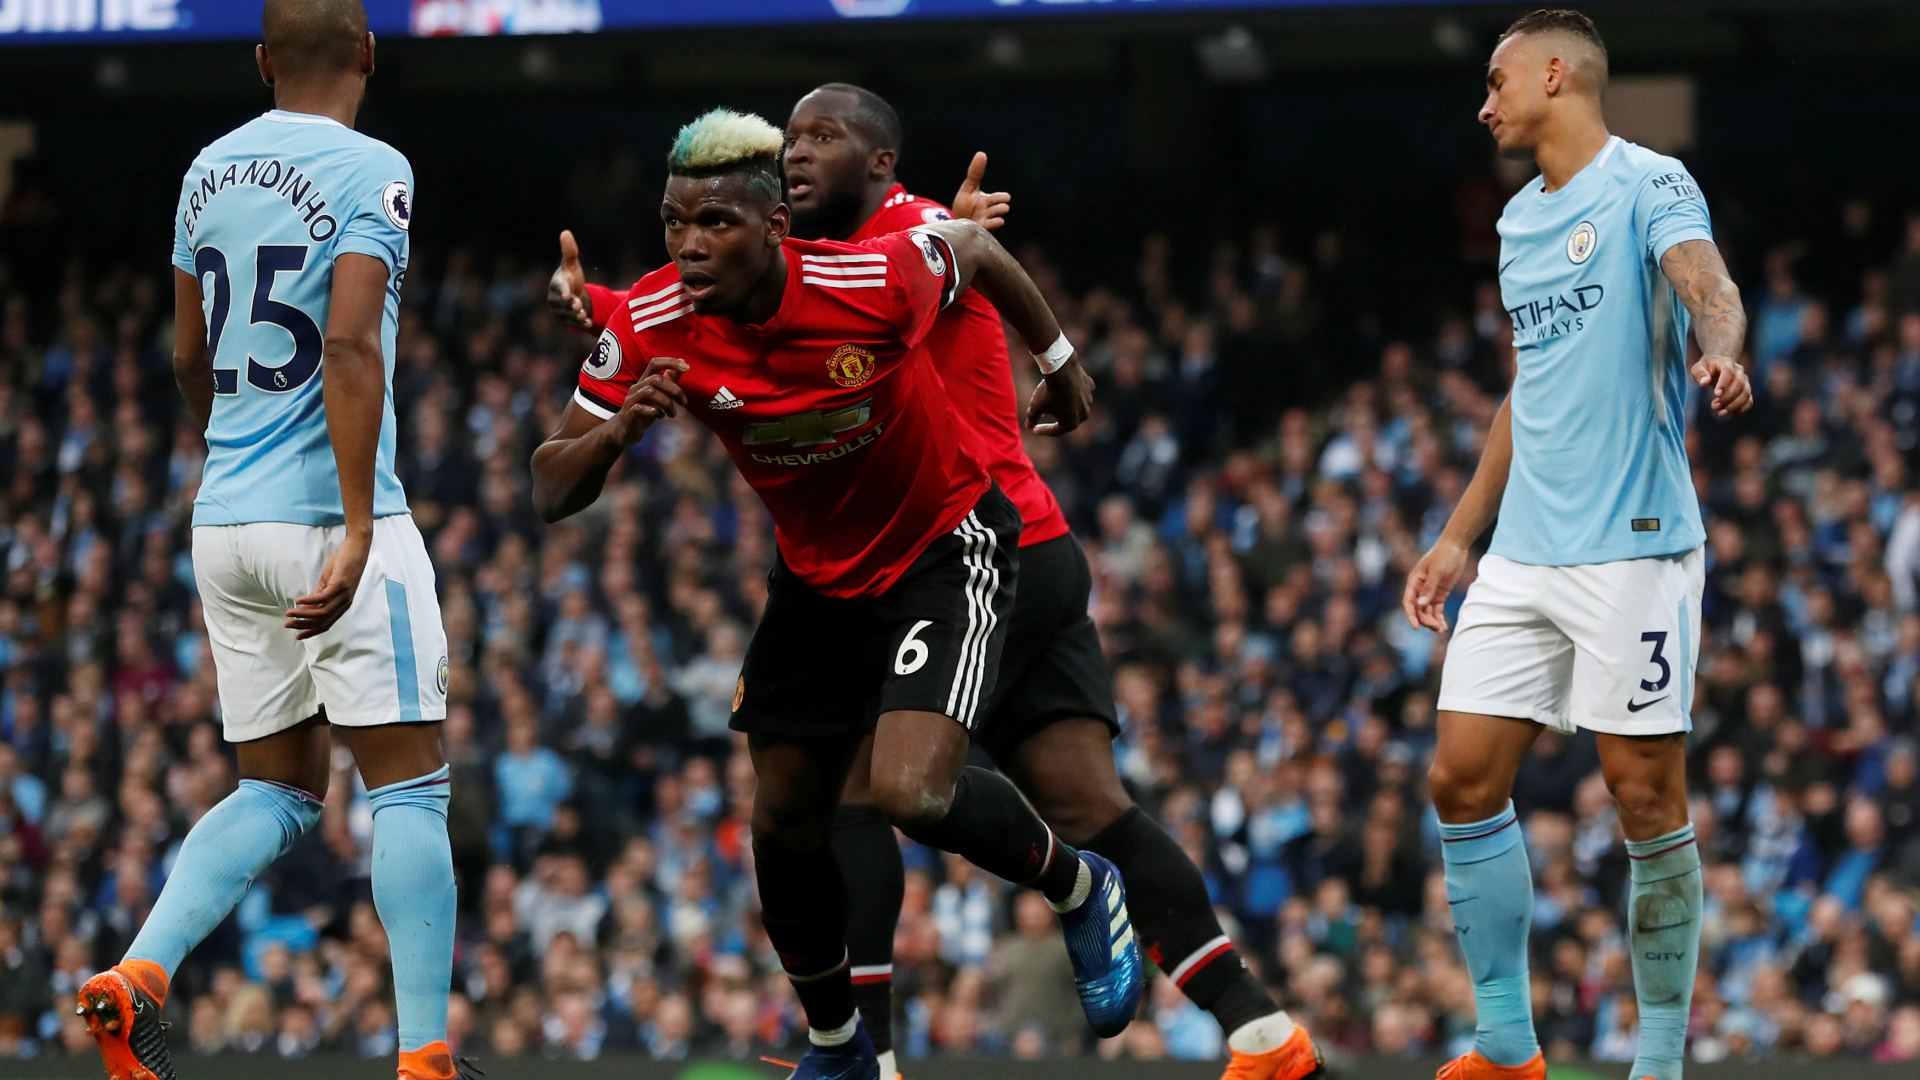 Paul Pogba inspires Man Utd comeback for the ages to restore derby